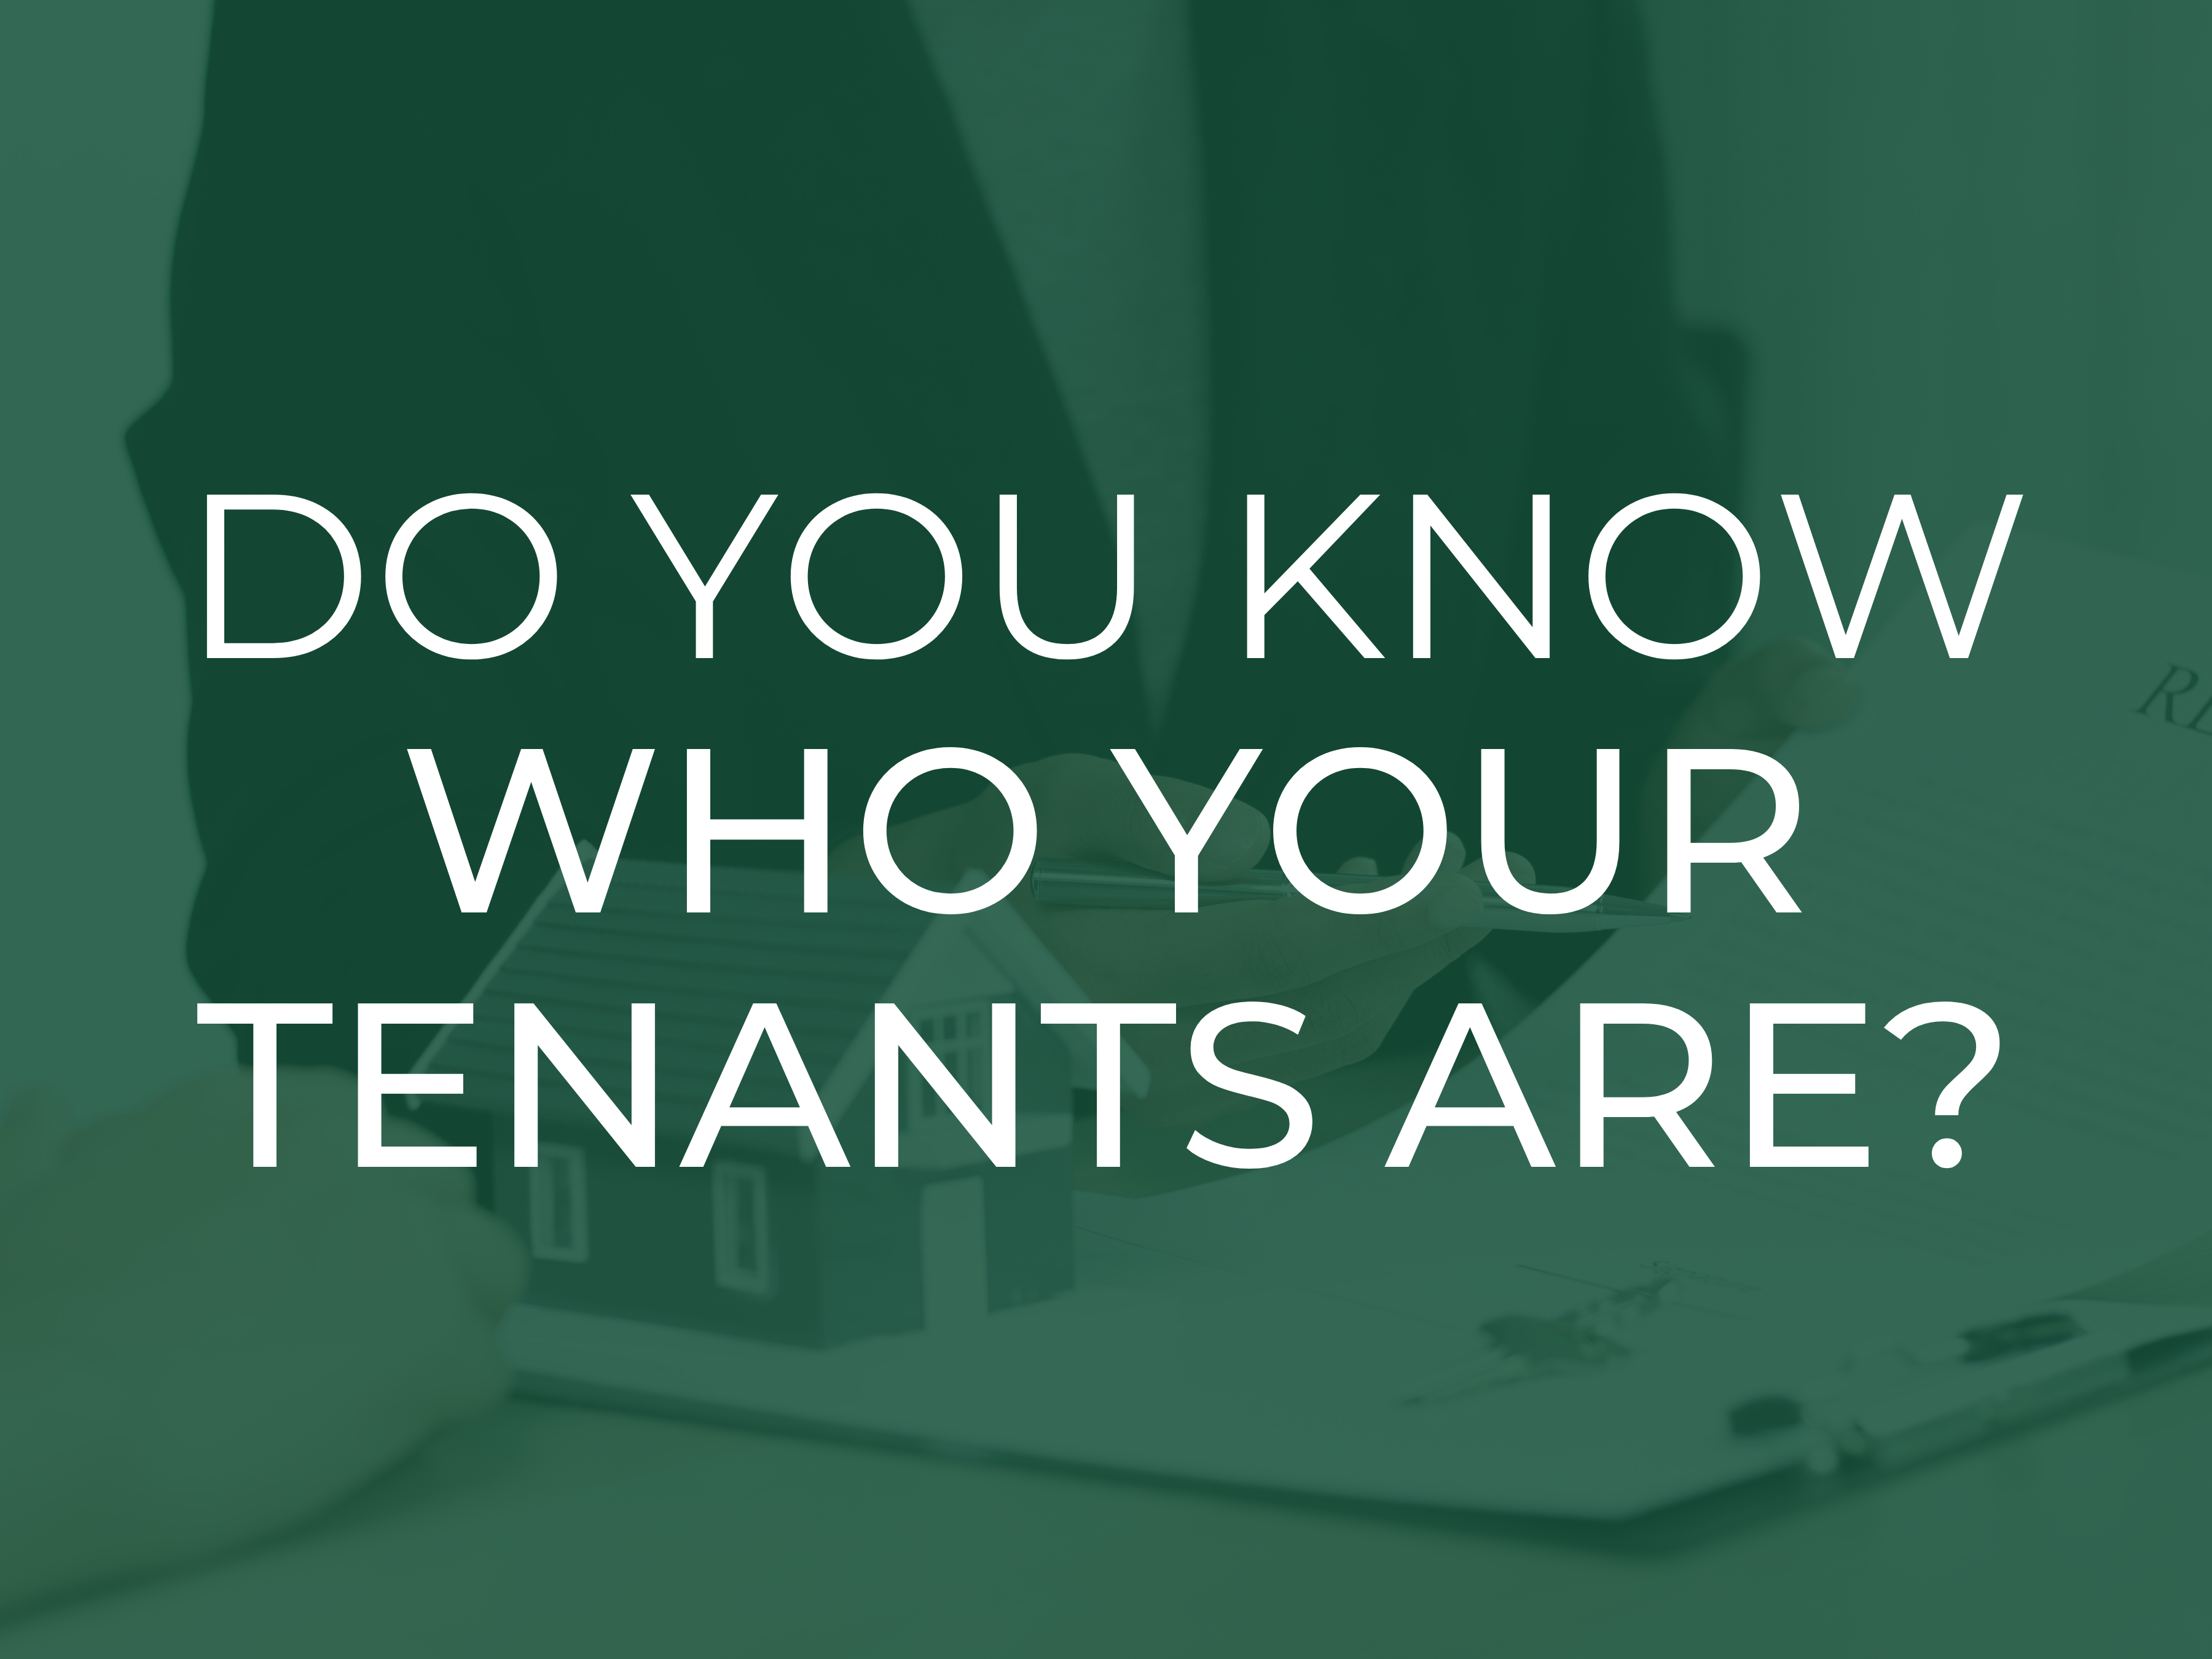 Do you know who your Tenants are?